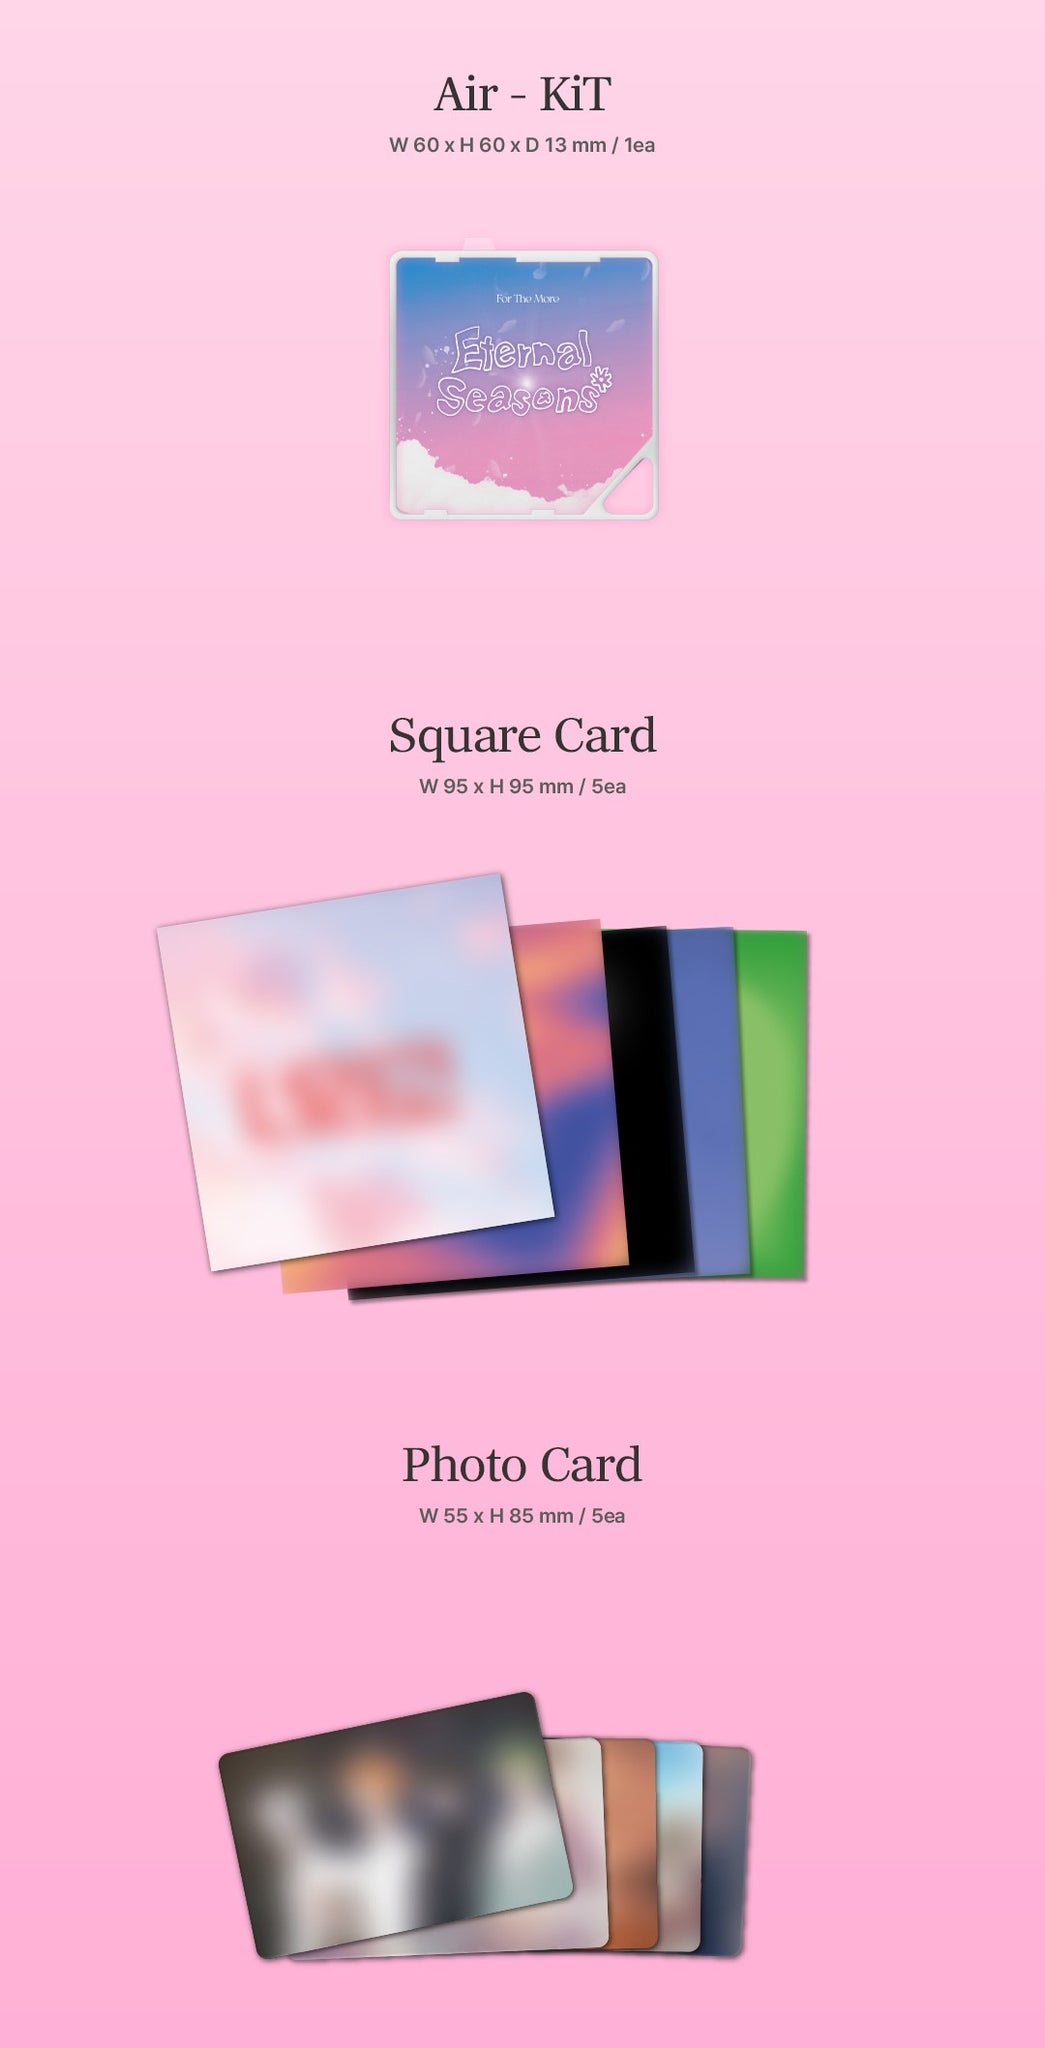 For The More 1st EP Album Eternal Seasons - KiT Version Inclusions: AiR-KiT, Square Card Set, Photocard Set